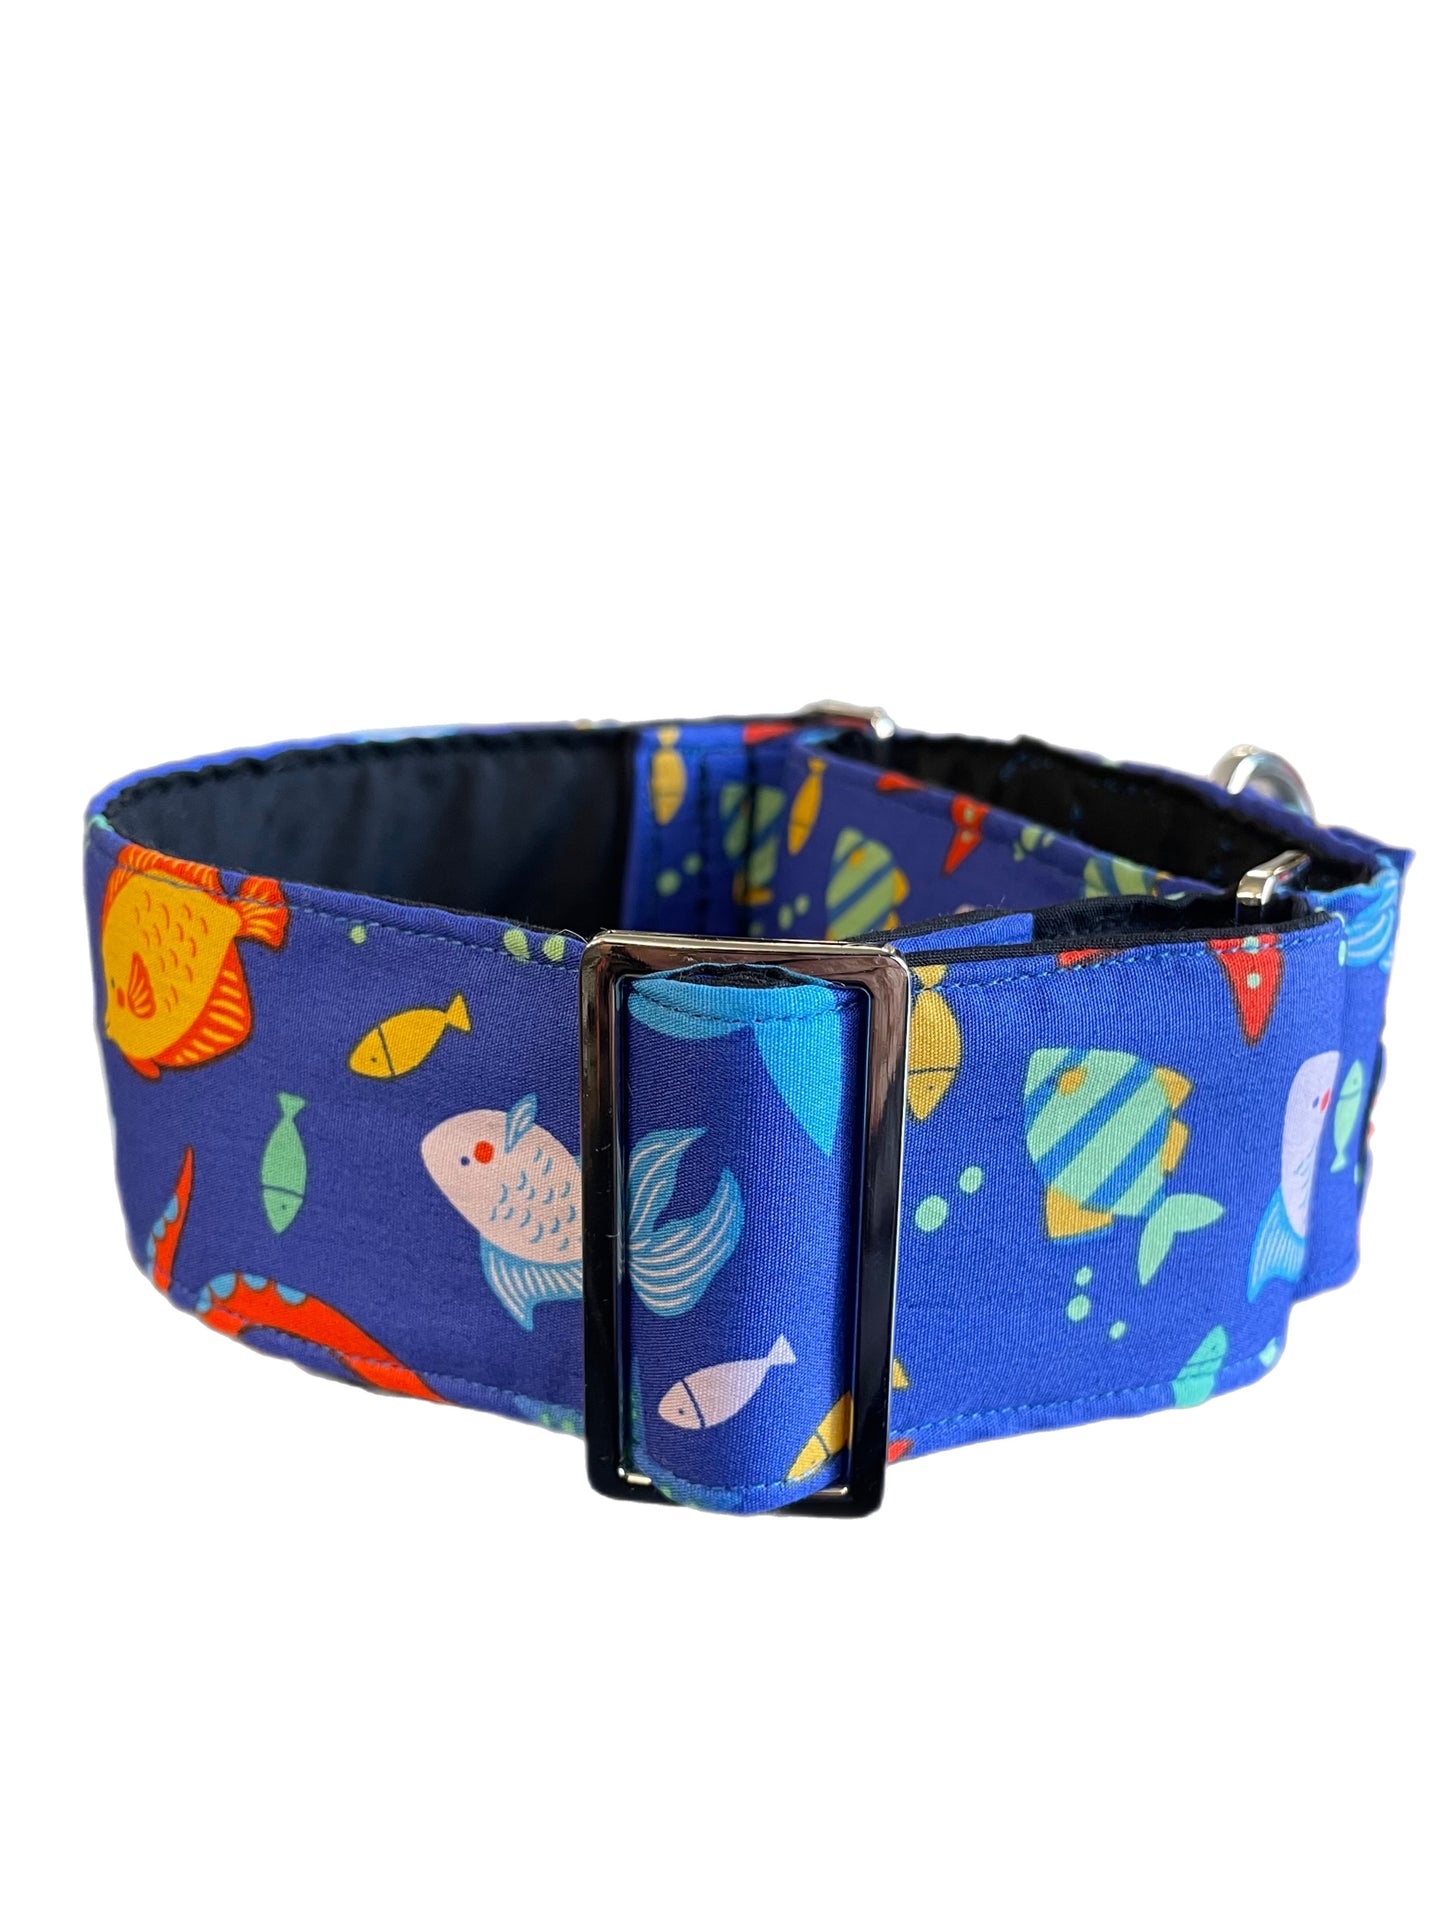 Little fishy Greyhound Martingale collar cotton covered 50mm width super soft